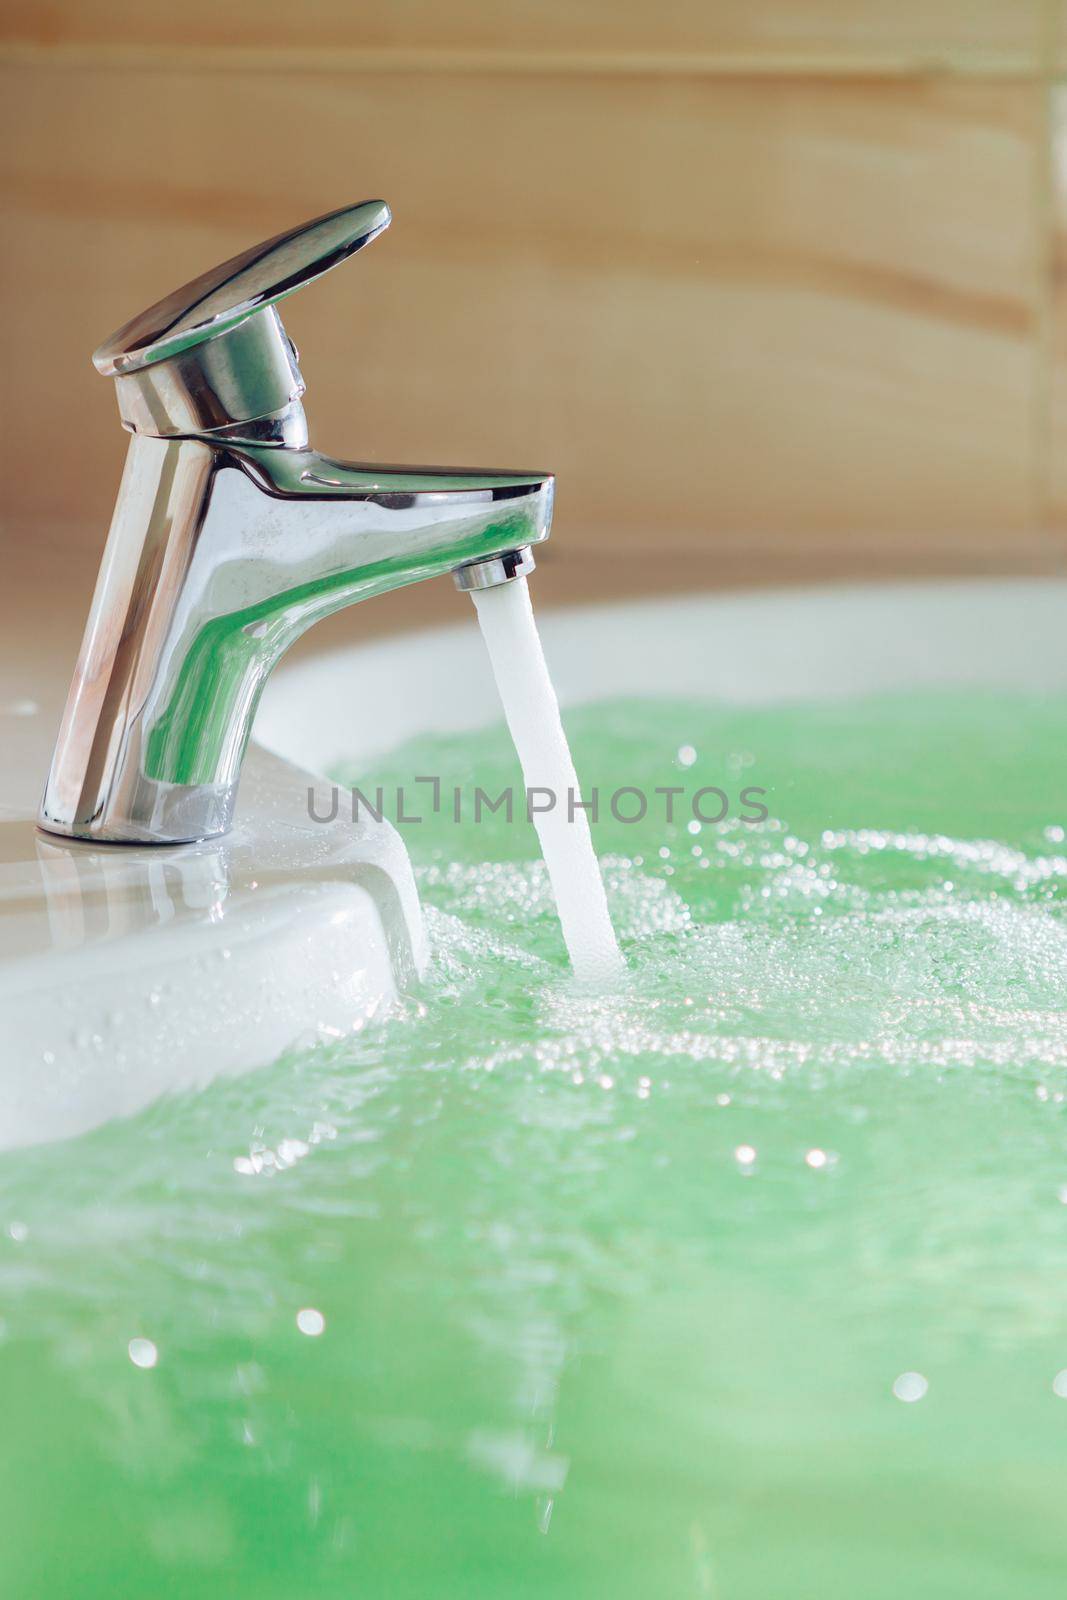 single handle faucet pouring hot water in a bath tub by nikkytok